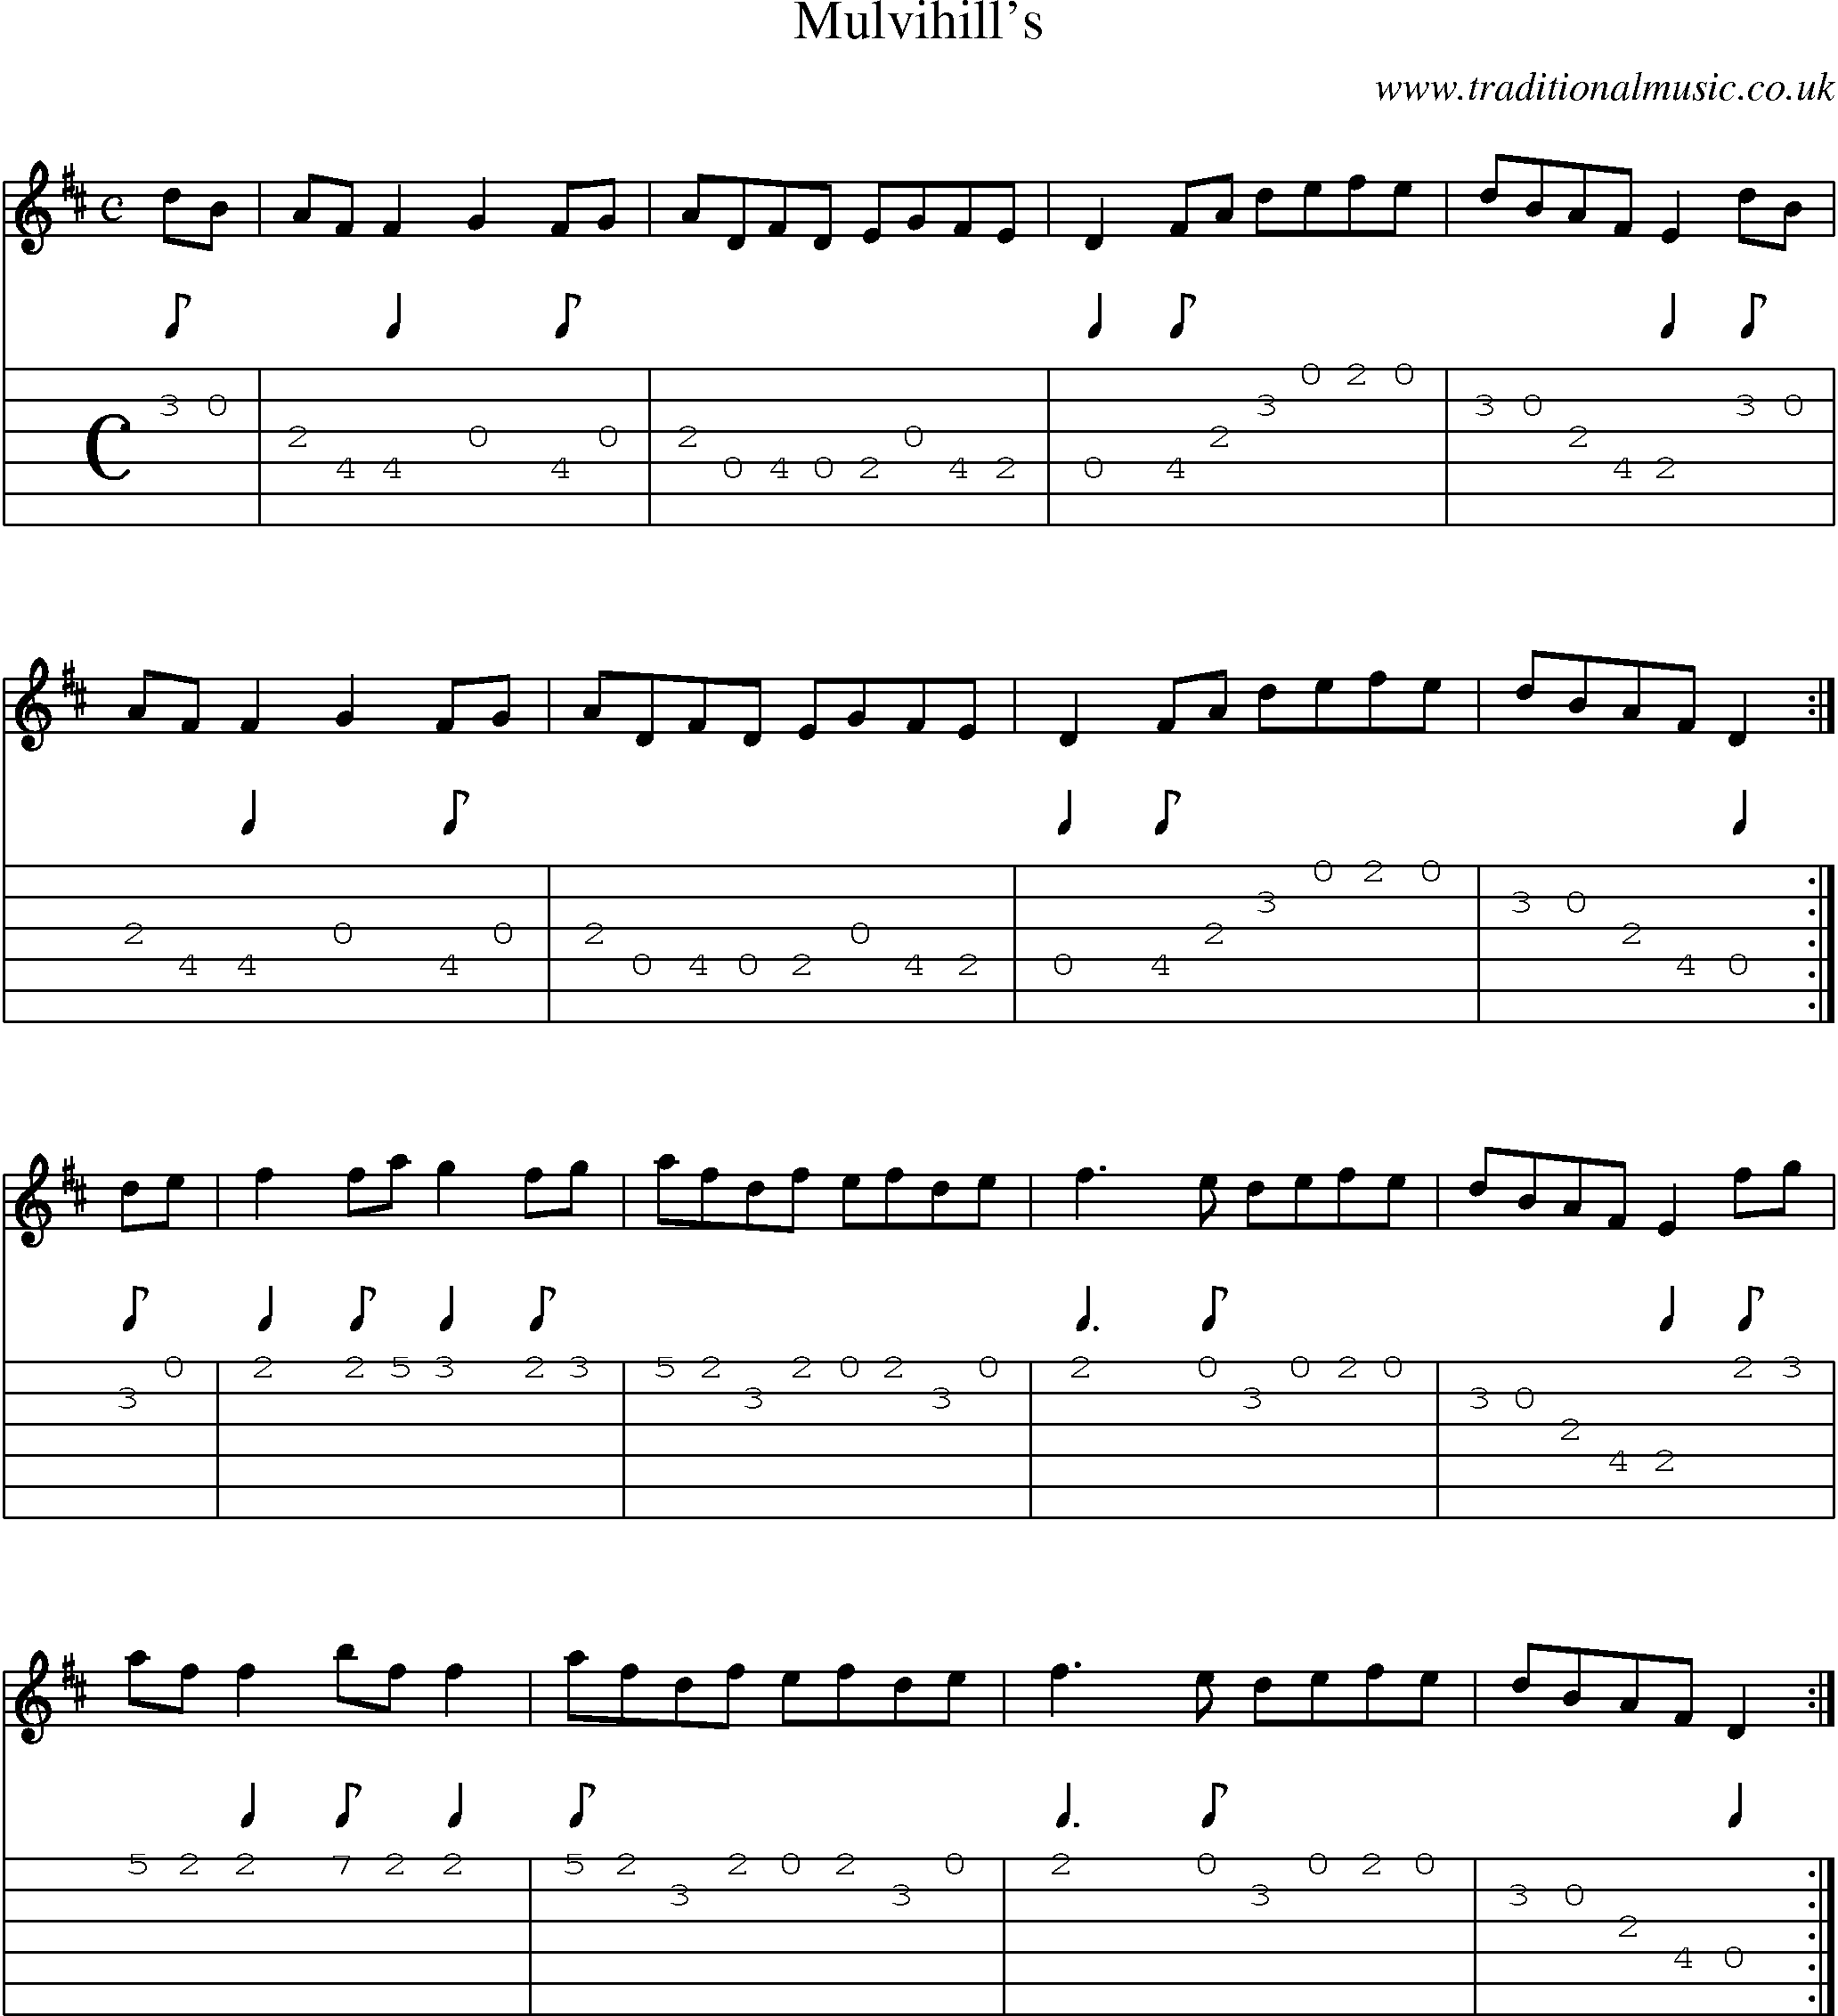 Music Score and Guitar Tabs for Mulvihills